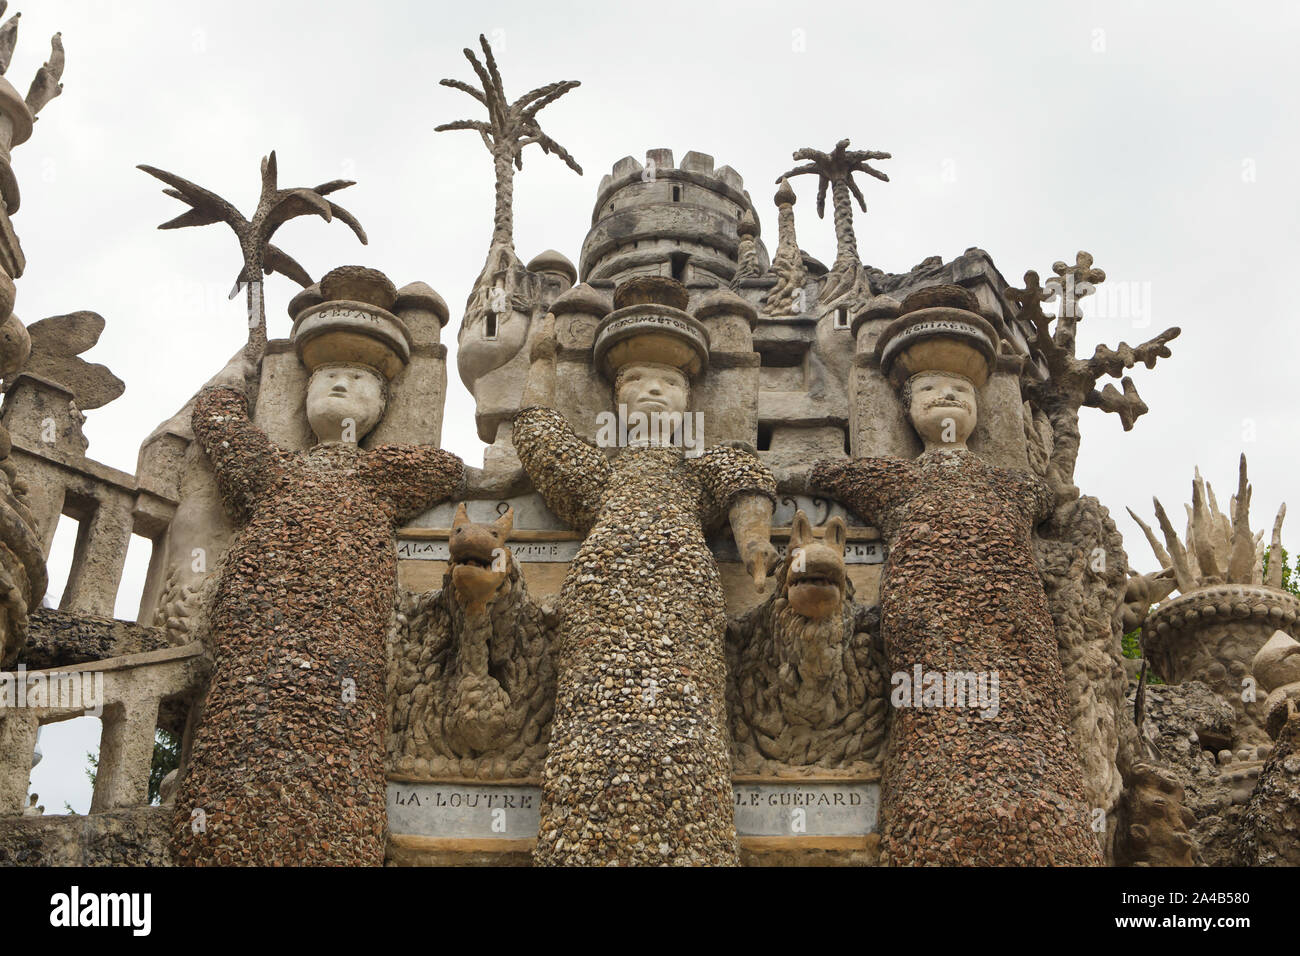 Huge statues of the Three Giants on the east facade of the Ideal Palace (Le Palais idéal) designed by French postman Ferdinand Cheval and build from 1876 to 1912 in Hauterives, France. Roman dictator Julius Caesar, Celtic king Vercingetorix and Ancient Greek mathematician and physicist Archimedes are depicted from left to right as the Three Giants. An otter and a cheetah are depicted bellow between the giants. ATTENTION: This image is a part of a photo essay of 36 photos featuring the Ideal Palace (Le Palais idéal). Stock Photo